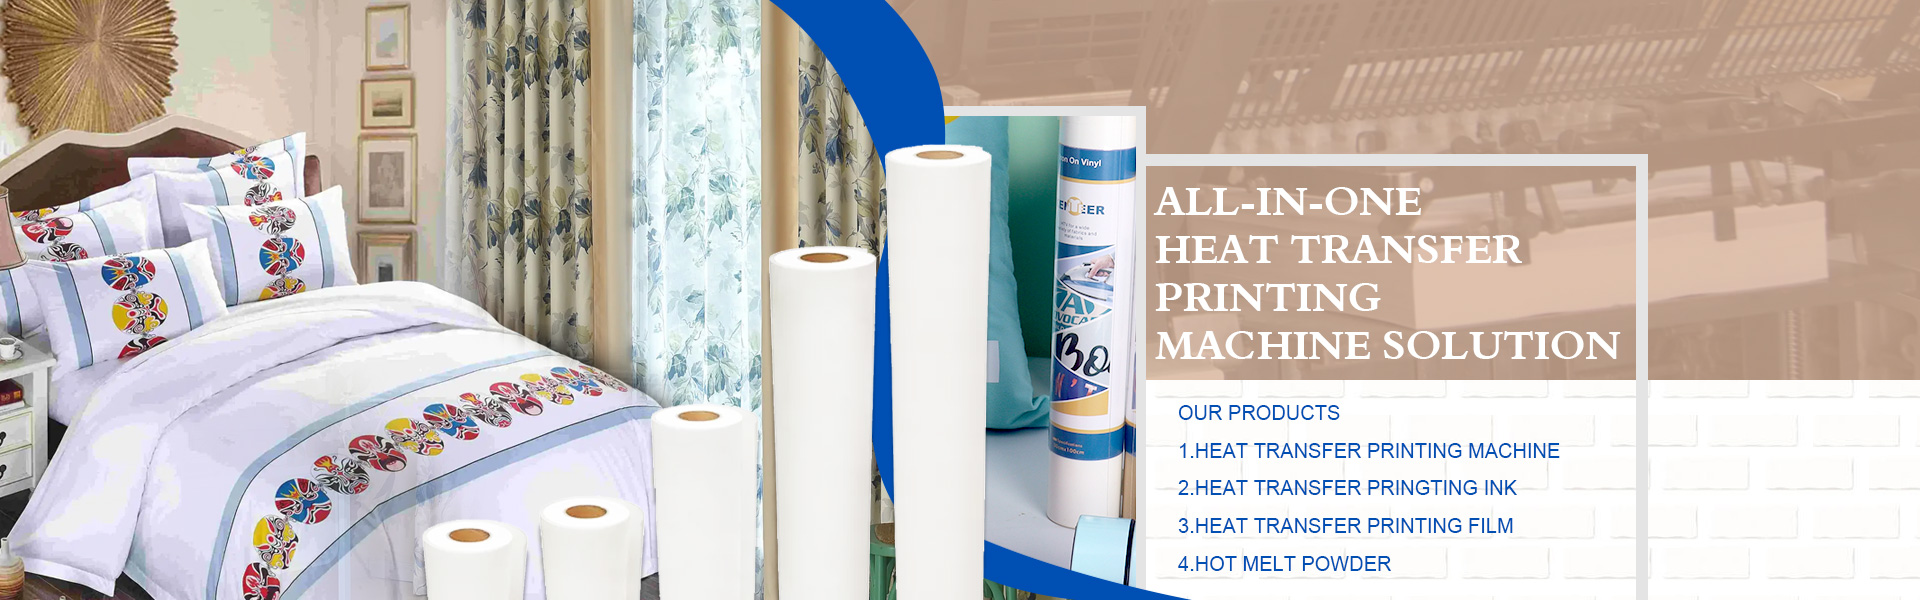 heat transfer paper,sublimation paper,digital printer paper,Suzhou Huarong Paper Products Co., Ltd